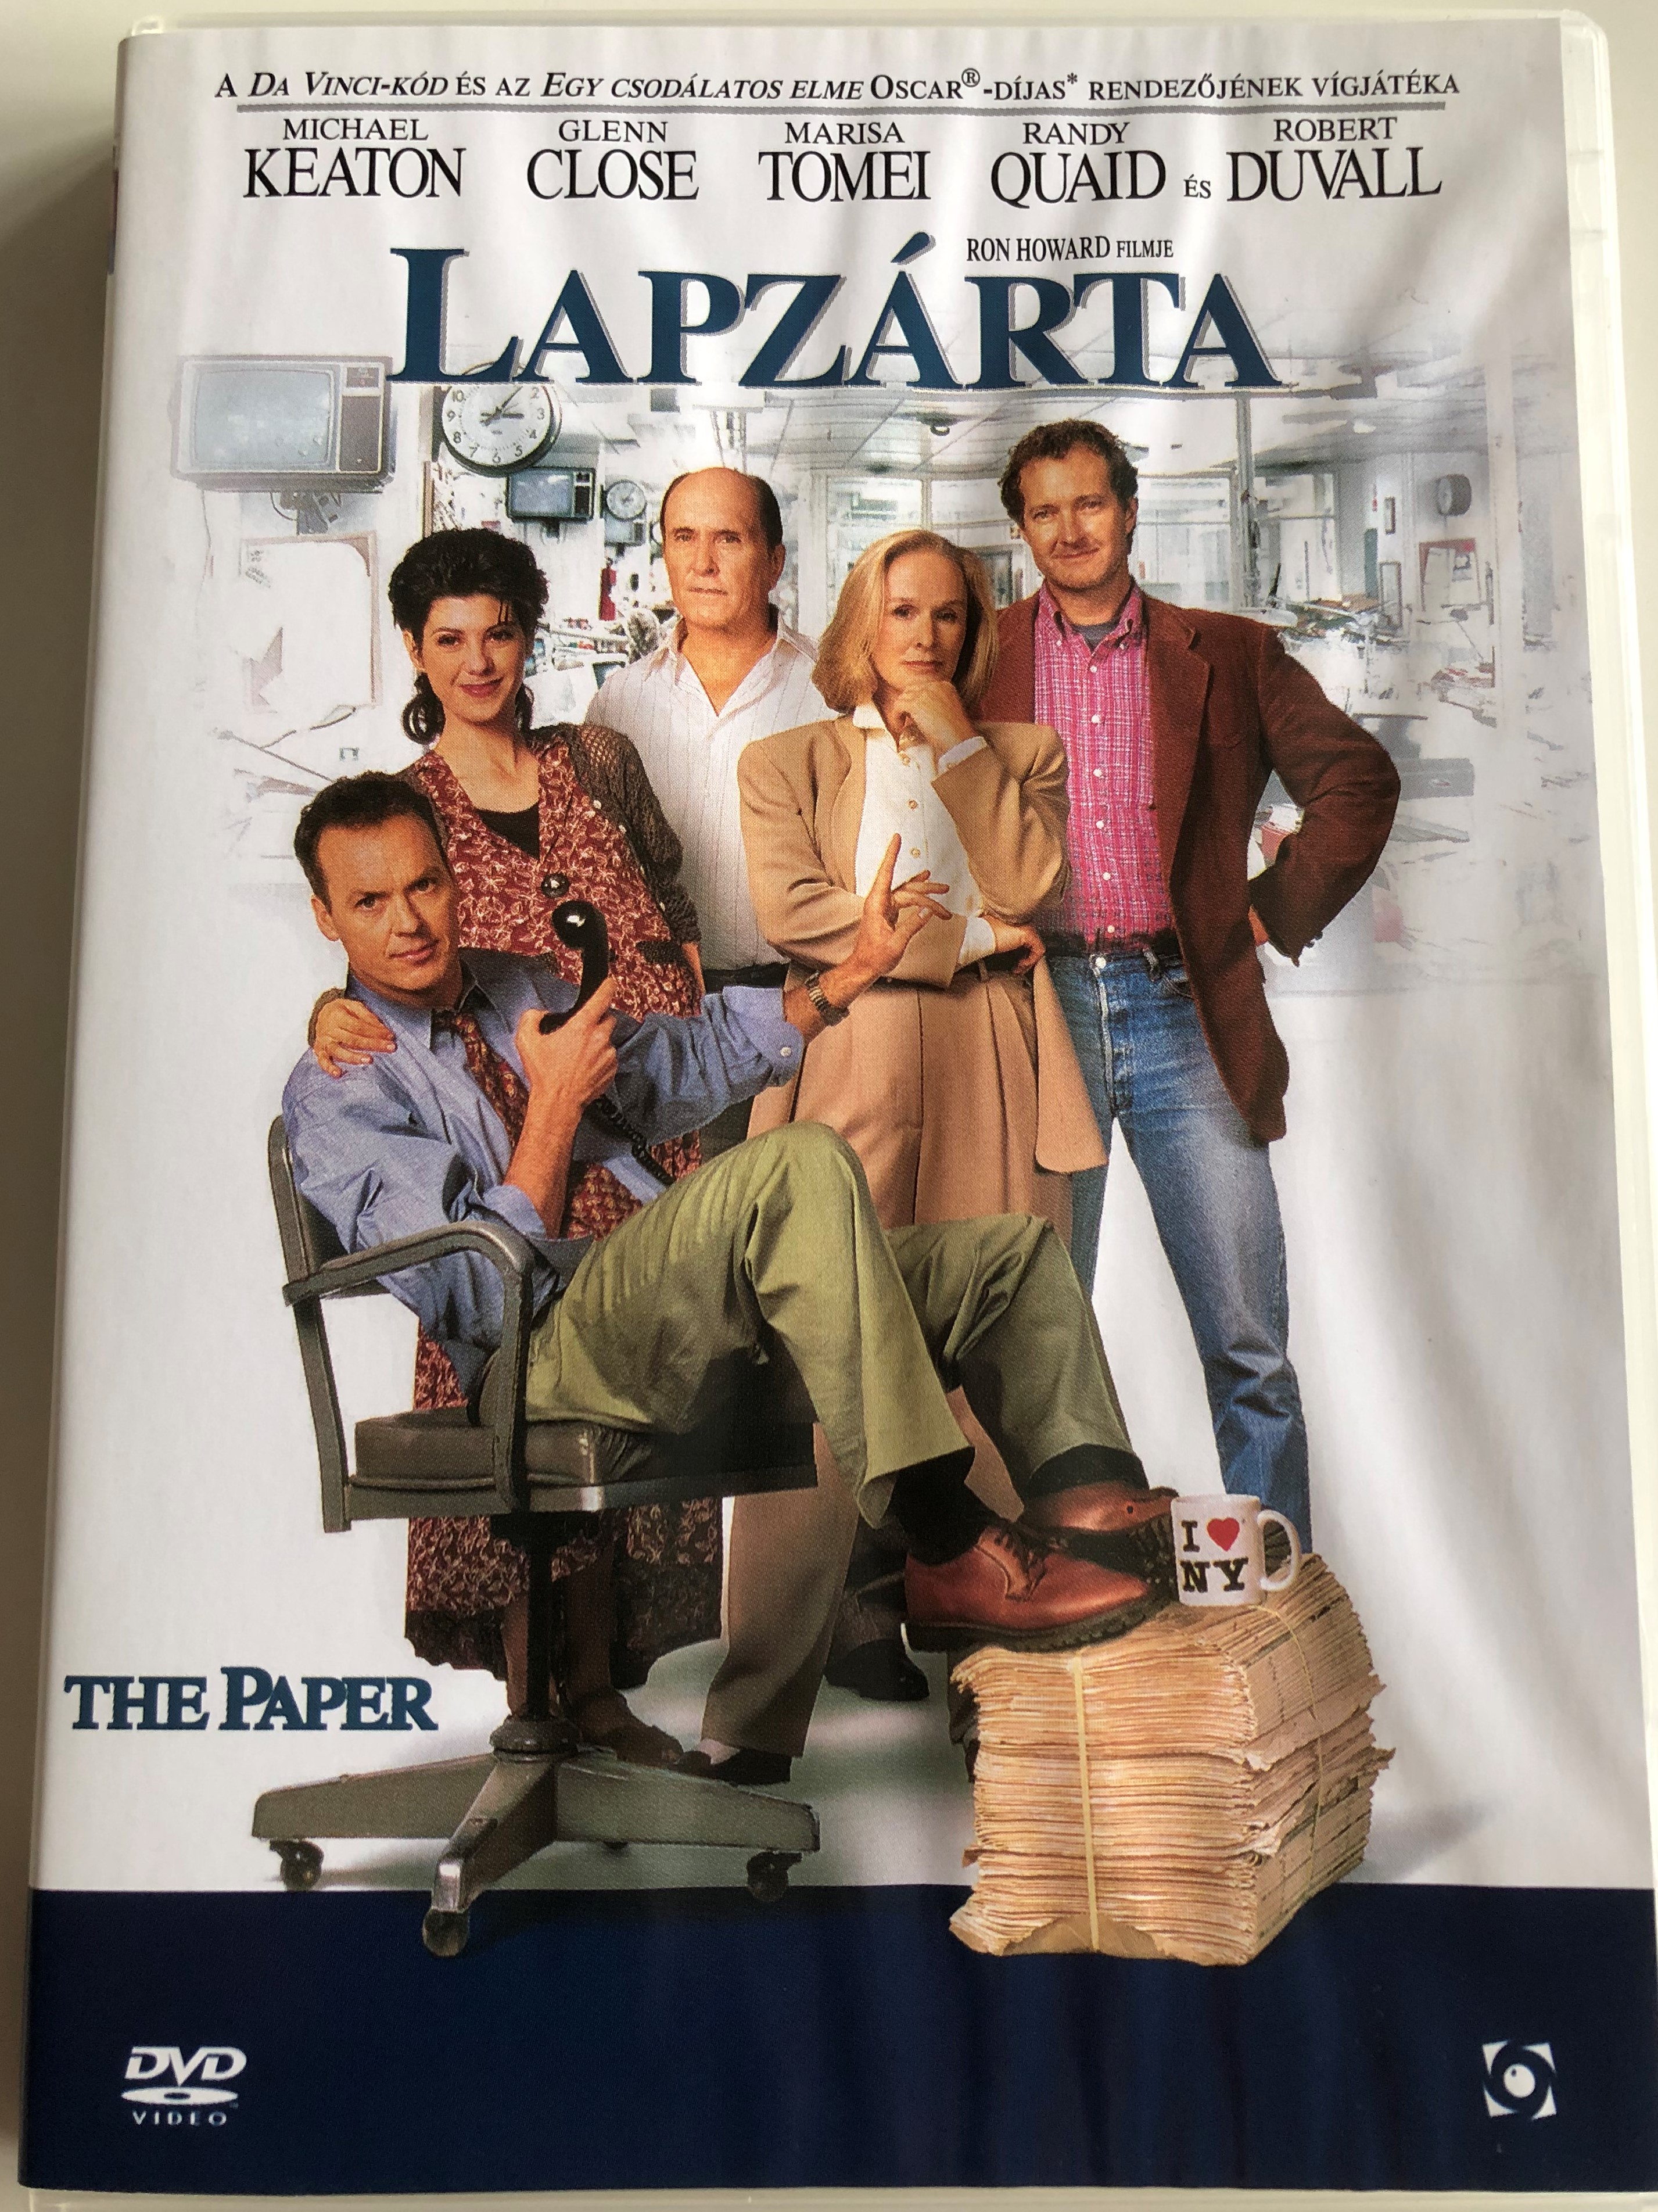 the-paper-dvd-1994-lapz-rta-directed-by-ron-howard-1.jpg